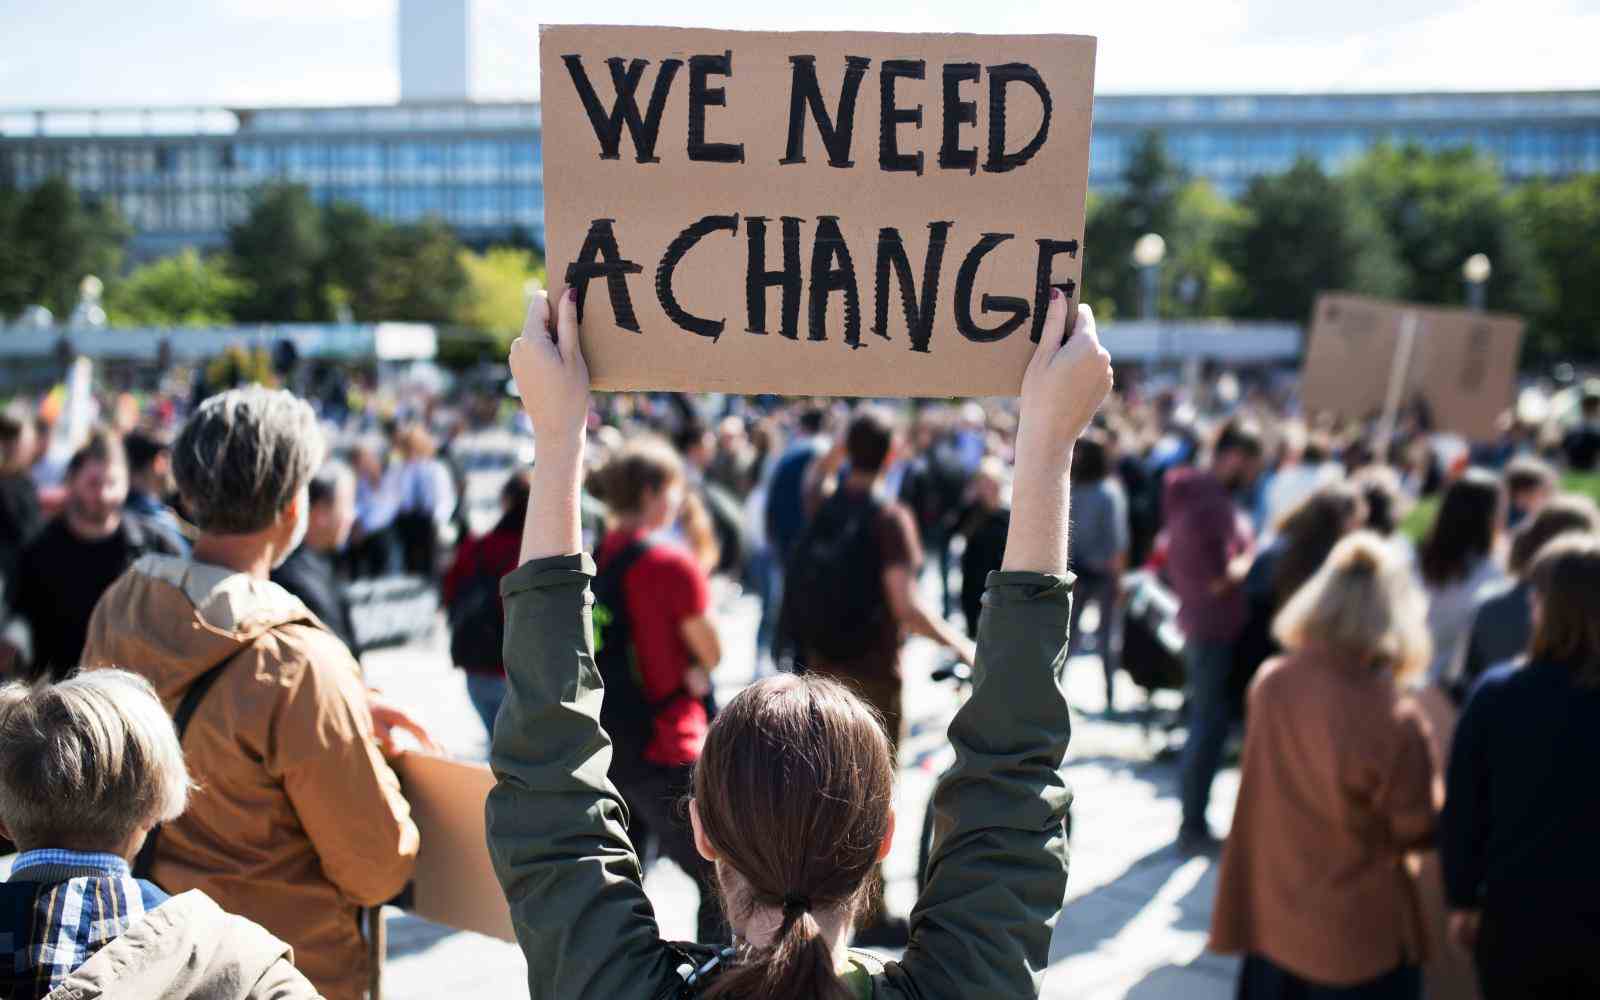 Young person at a rally of climate activist holding a sign that says "We need a change"